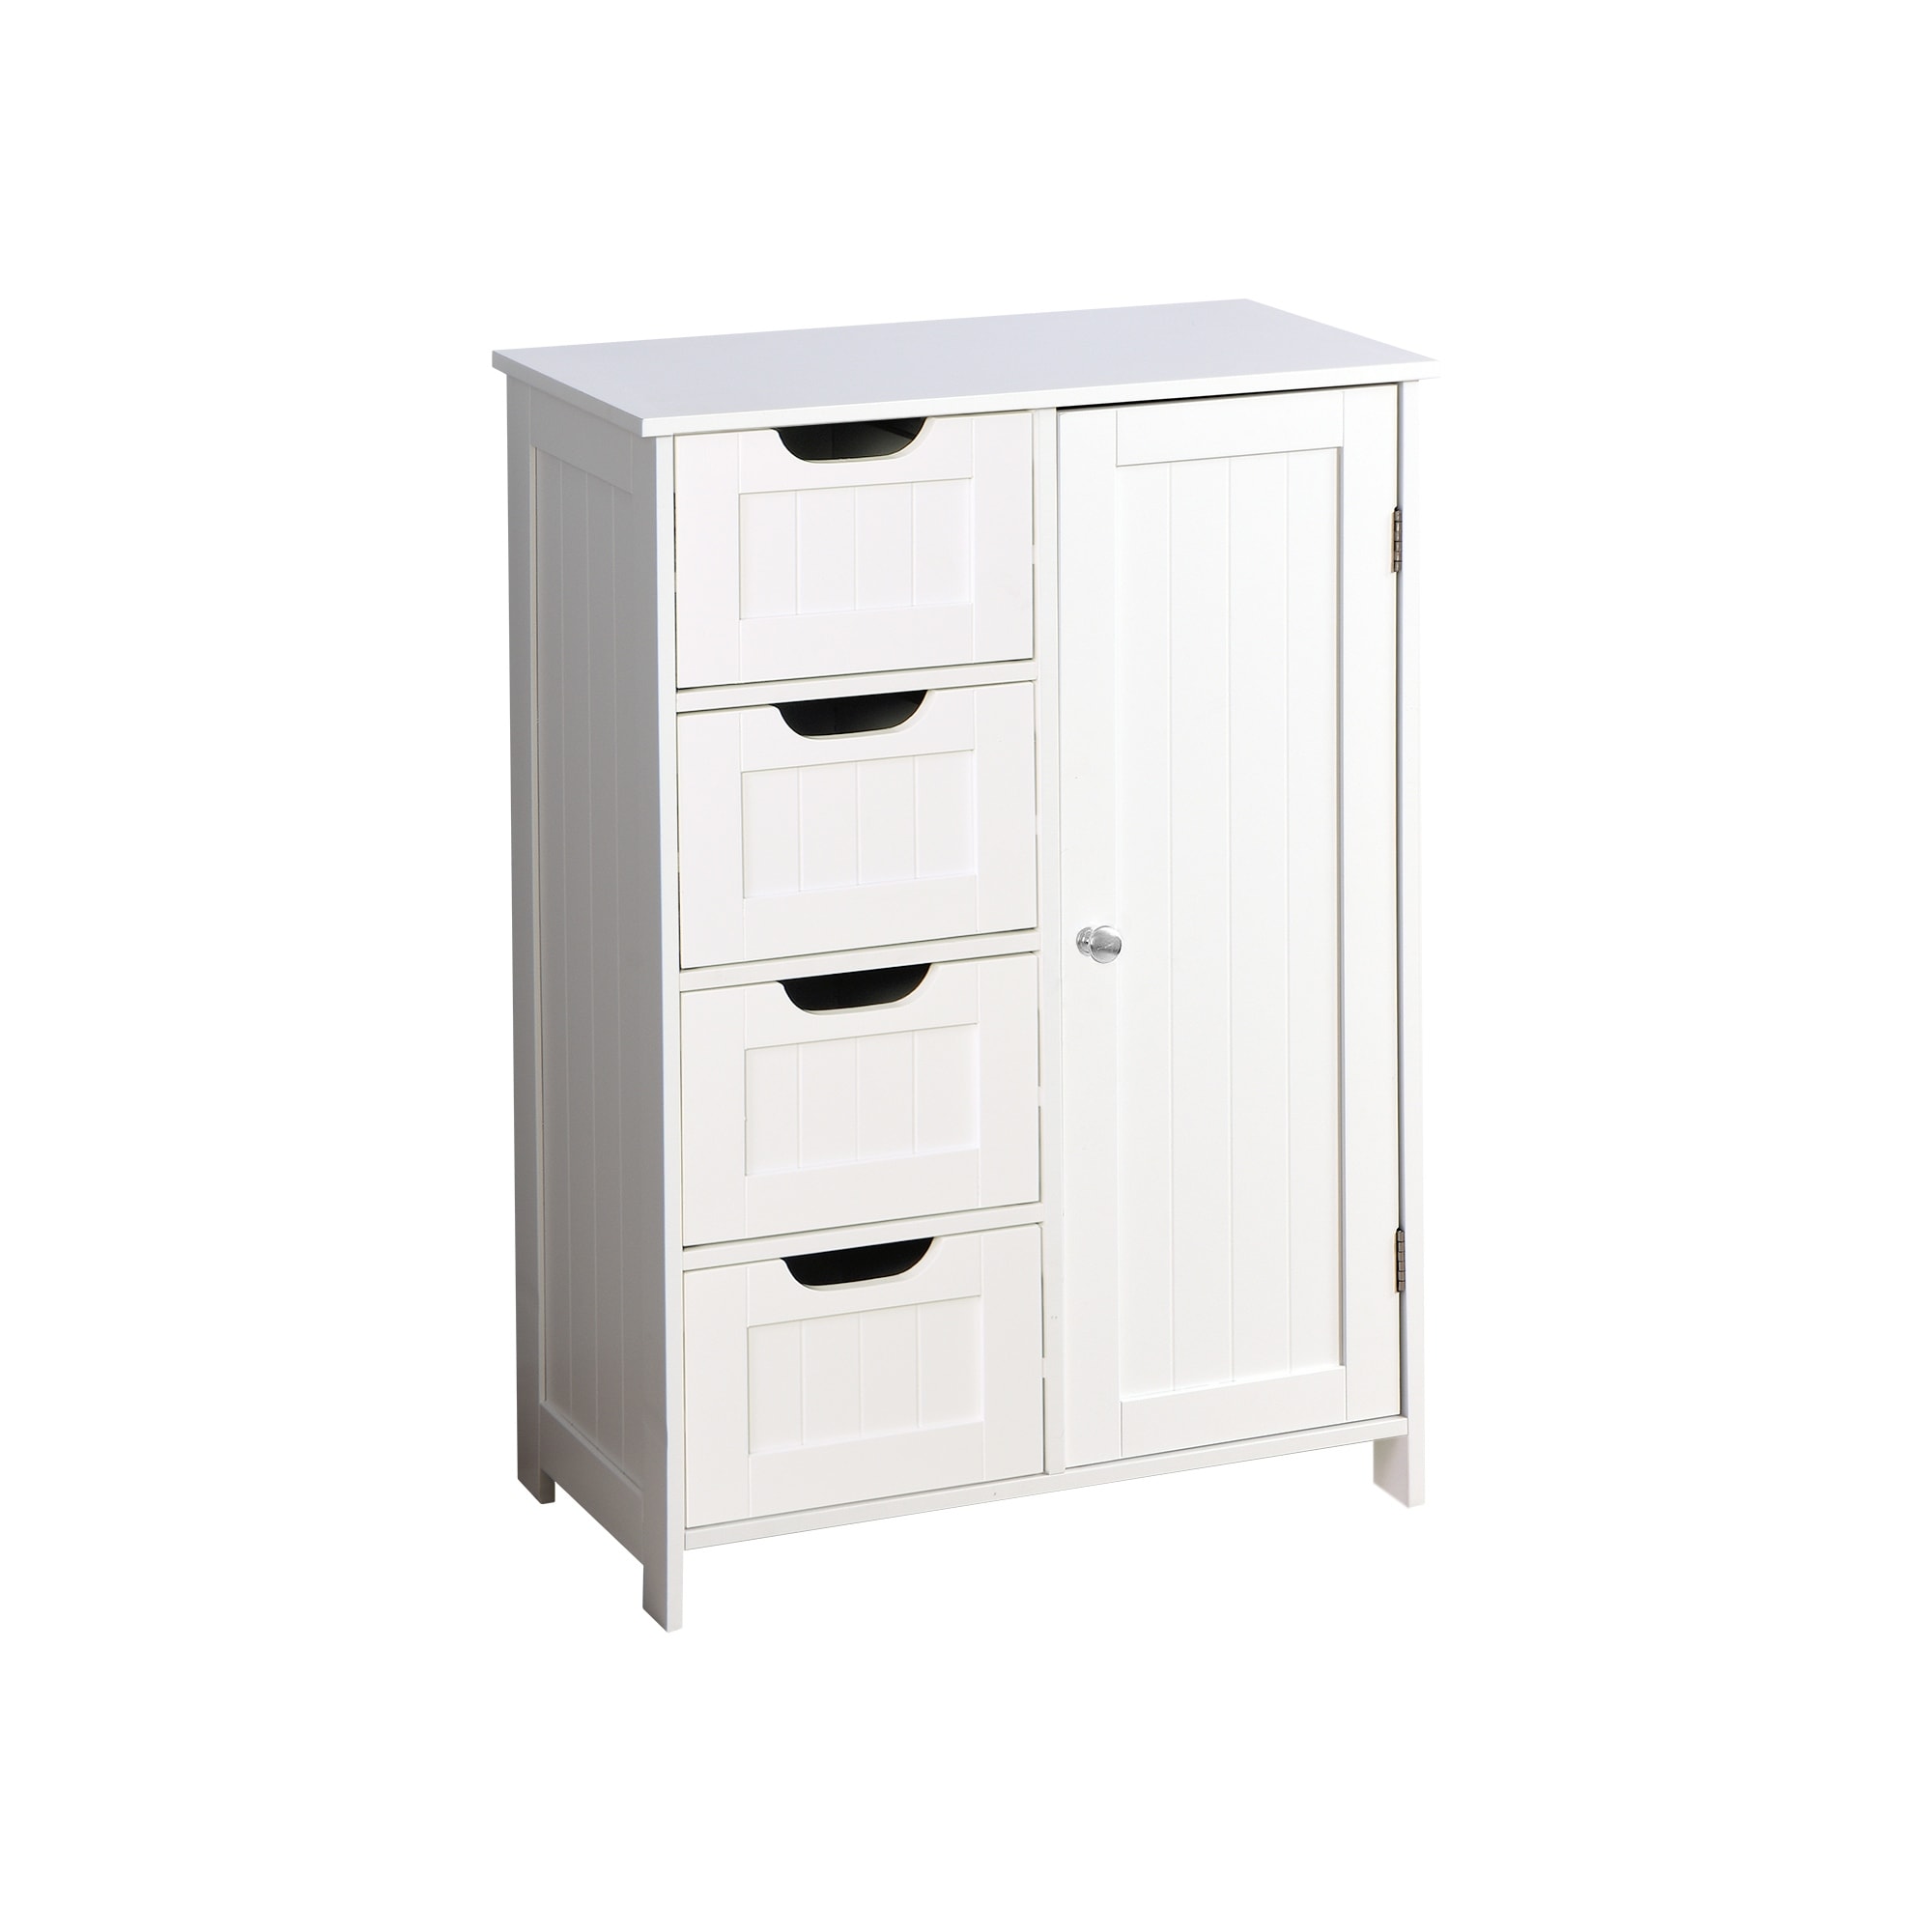 https://ak1.ostkcdn.com/images/products/is/images/direct/256946fc6eceef0c07414d693b9ecb8129bb4711/EPOWP-Bathroom-Storage-Cabinet-Floor-Cabinet-with-Adjustable-Shelf.jpg